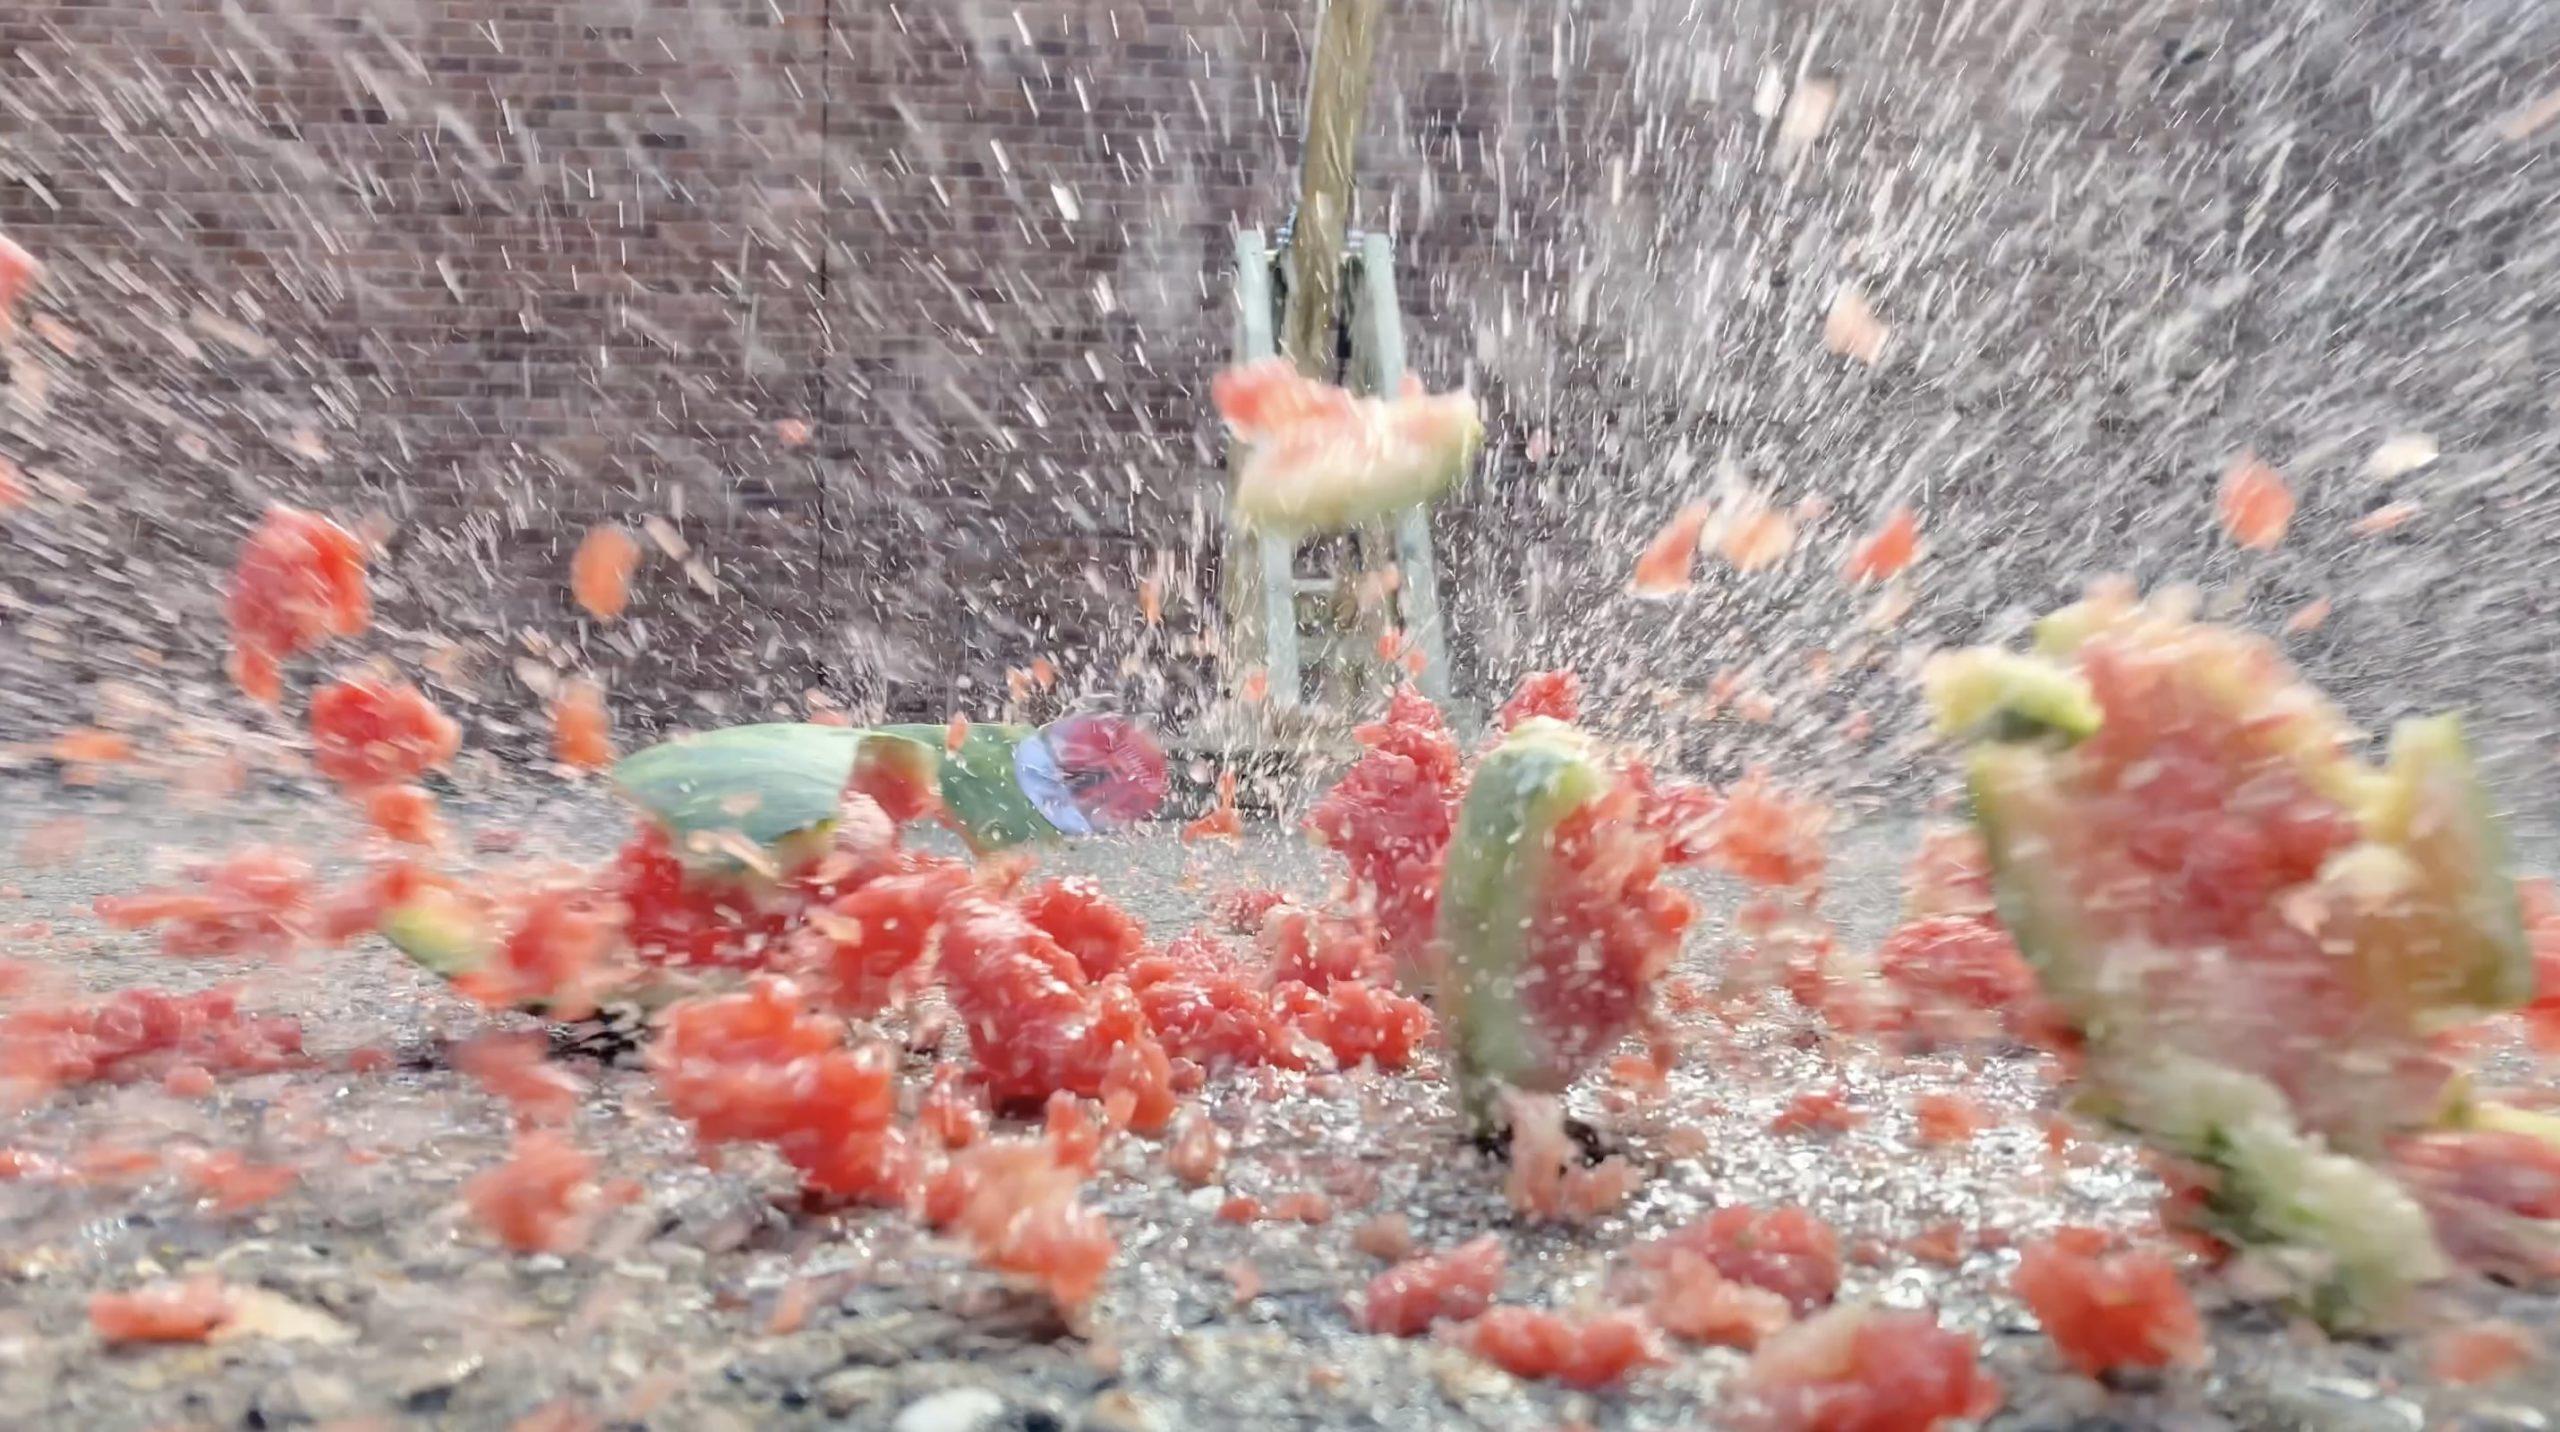 A close up shot of an exploding watermelon